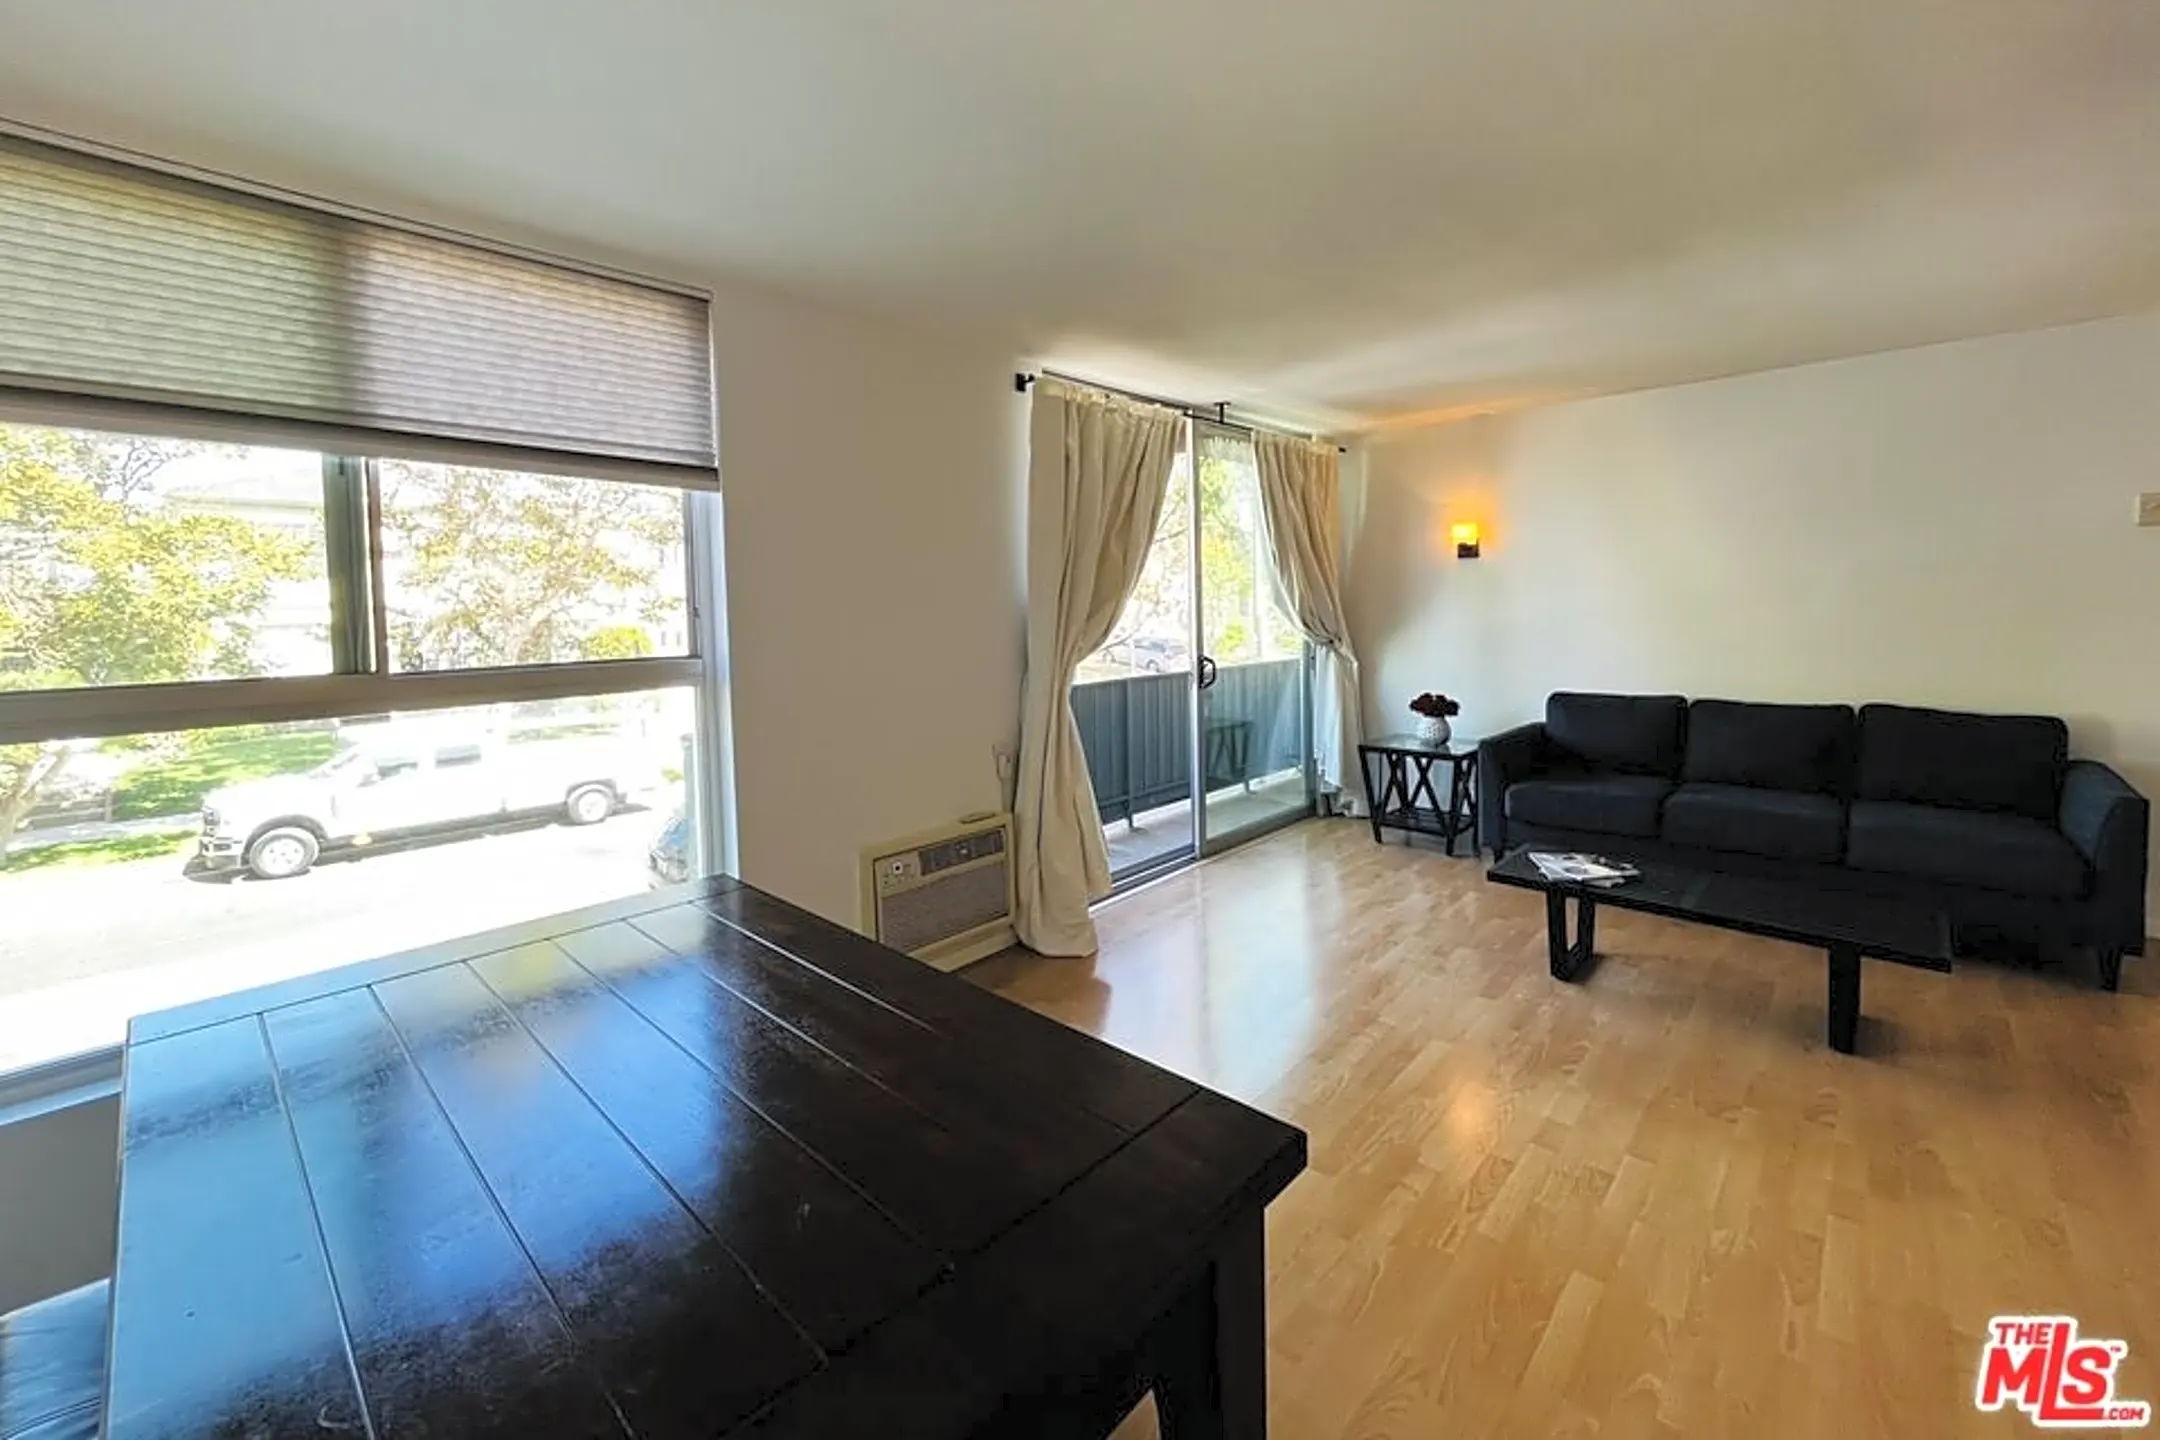 Living Room - 525 N Sycamore Ave #204 - Los Angeles, CA